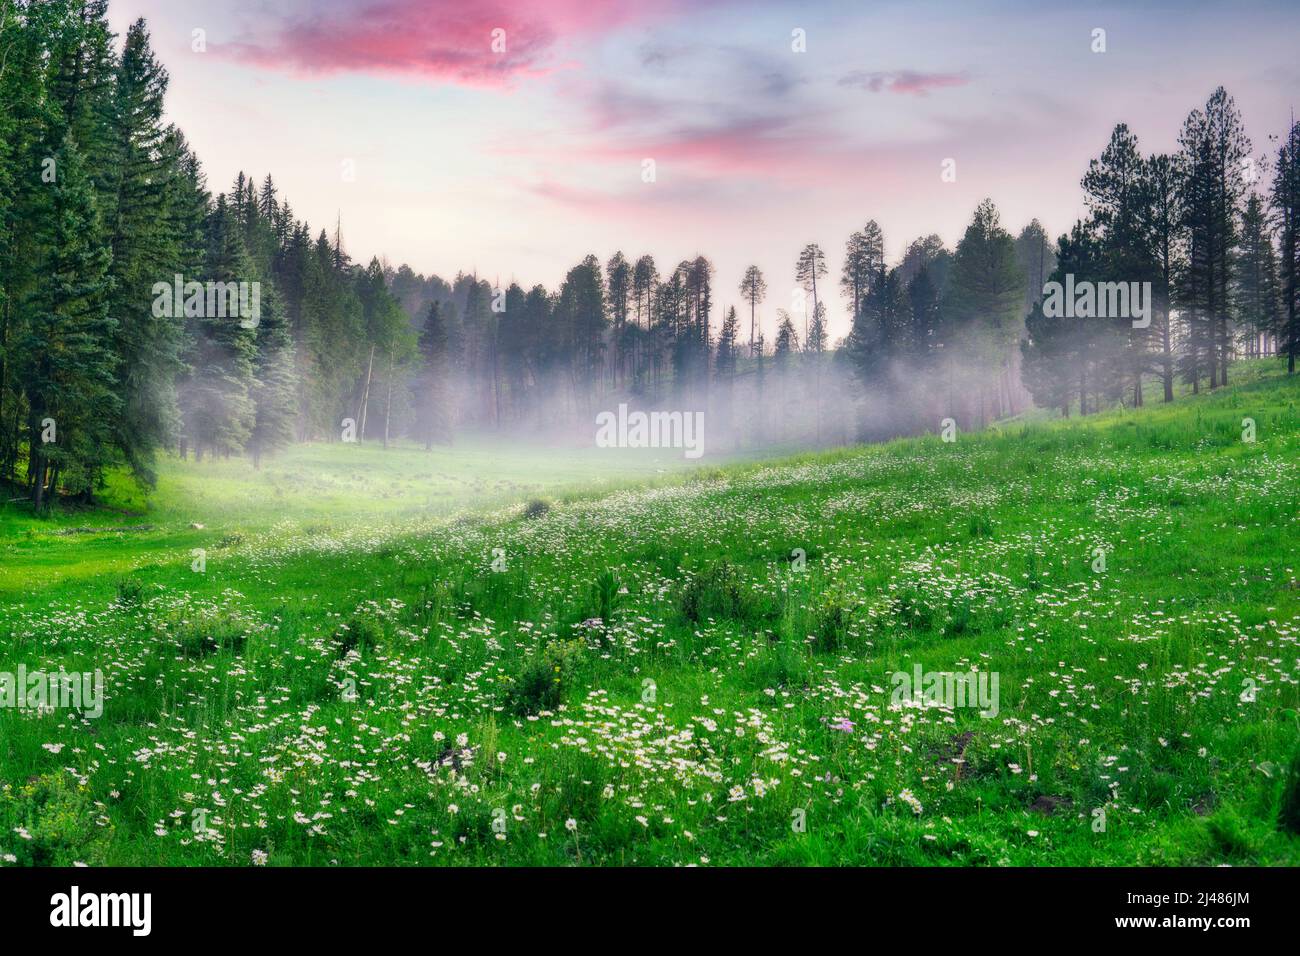 Perfect Valley With Green Grass And Low Mist In Morning Evening Stock Photo